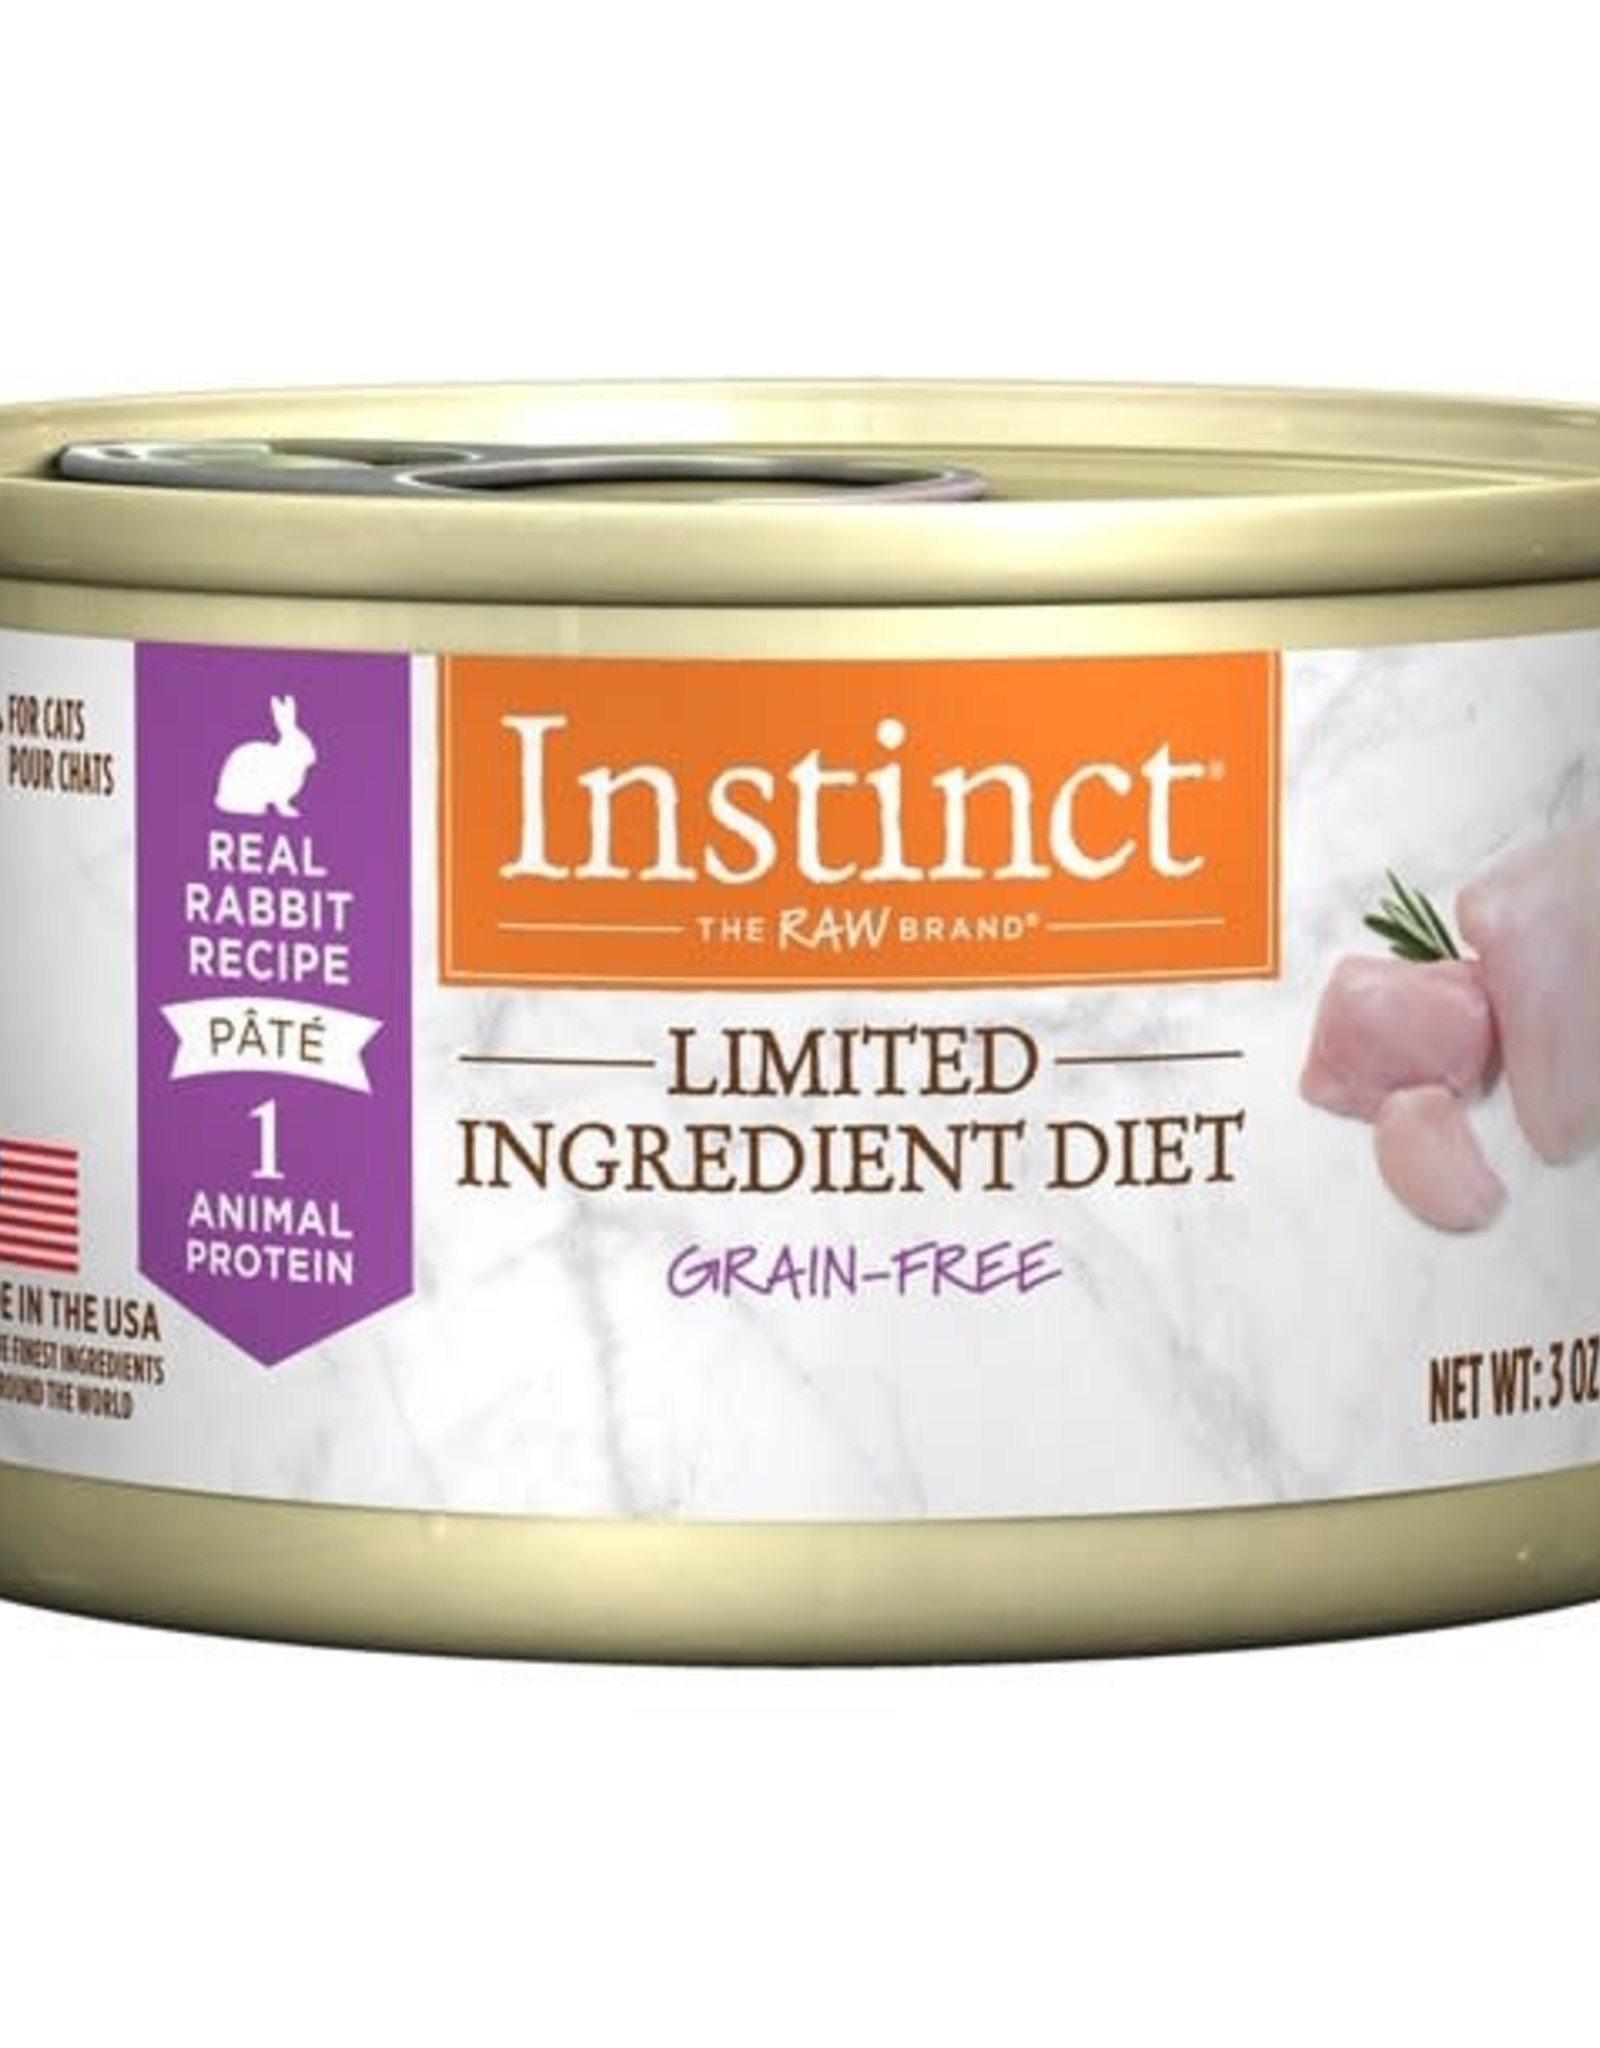 Nature's Variety Nature's Variety Instinct Limited Ingredient Diet Grain-Free Real Rabbit Recipe Canned Cat Food 3 oz